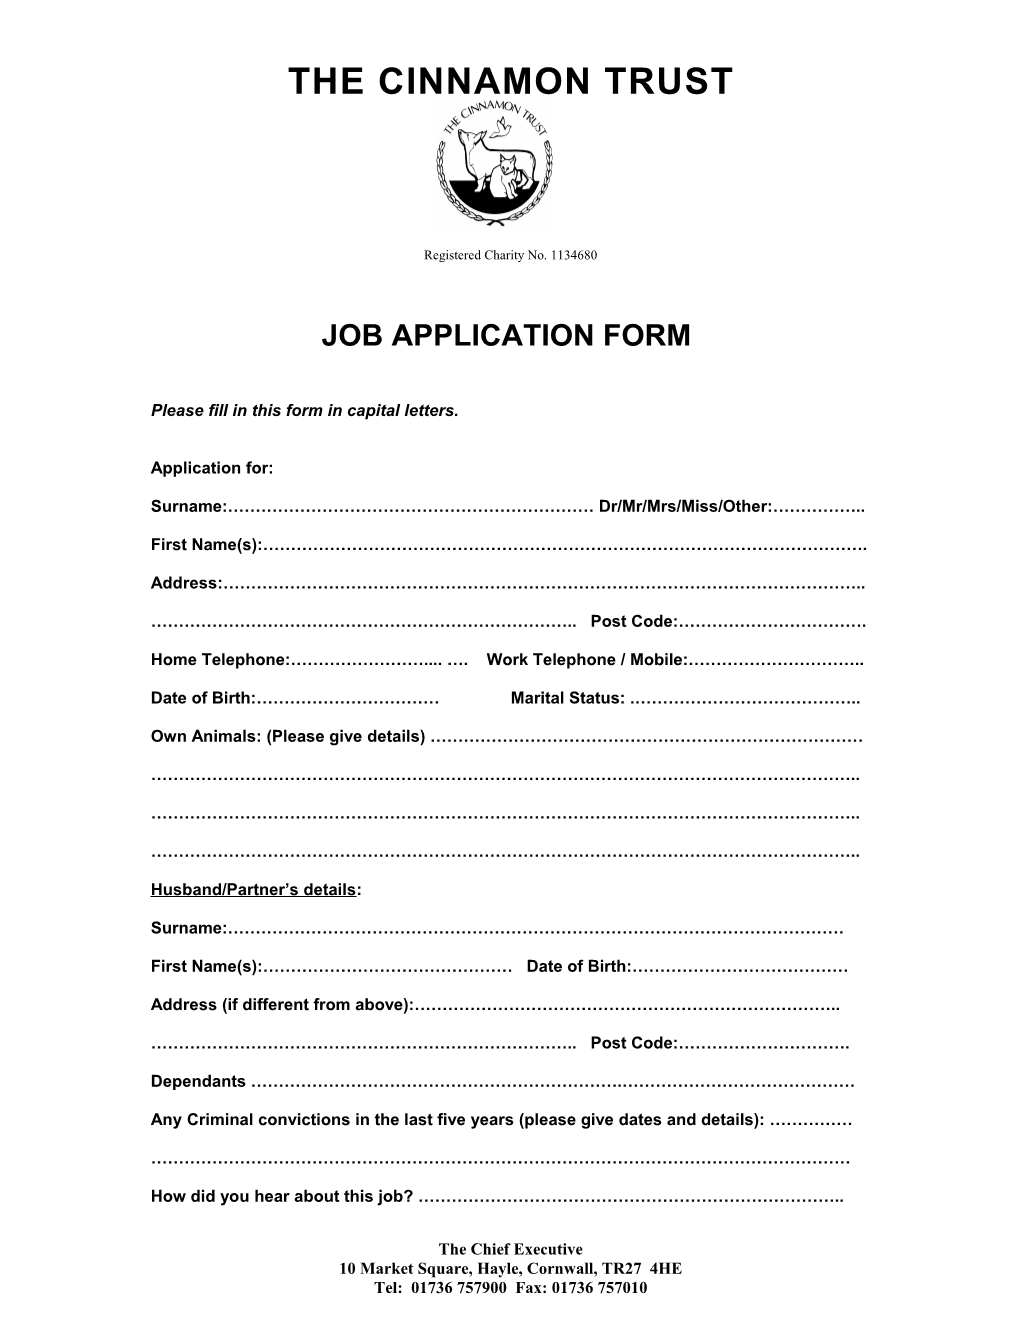 Please Fill in This Form in Capital Letters